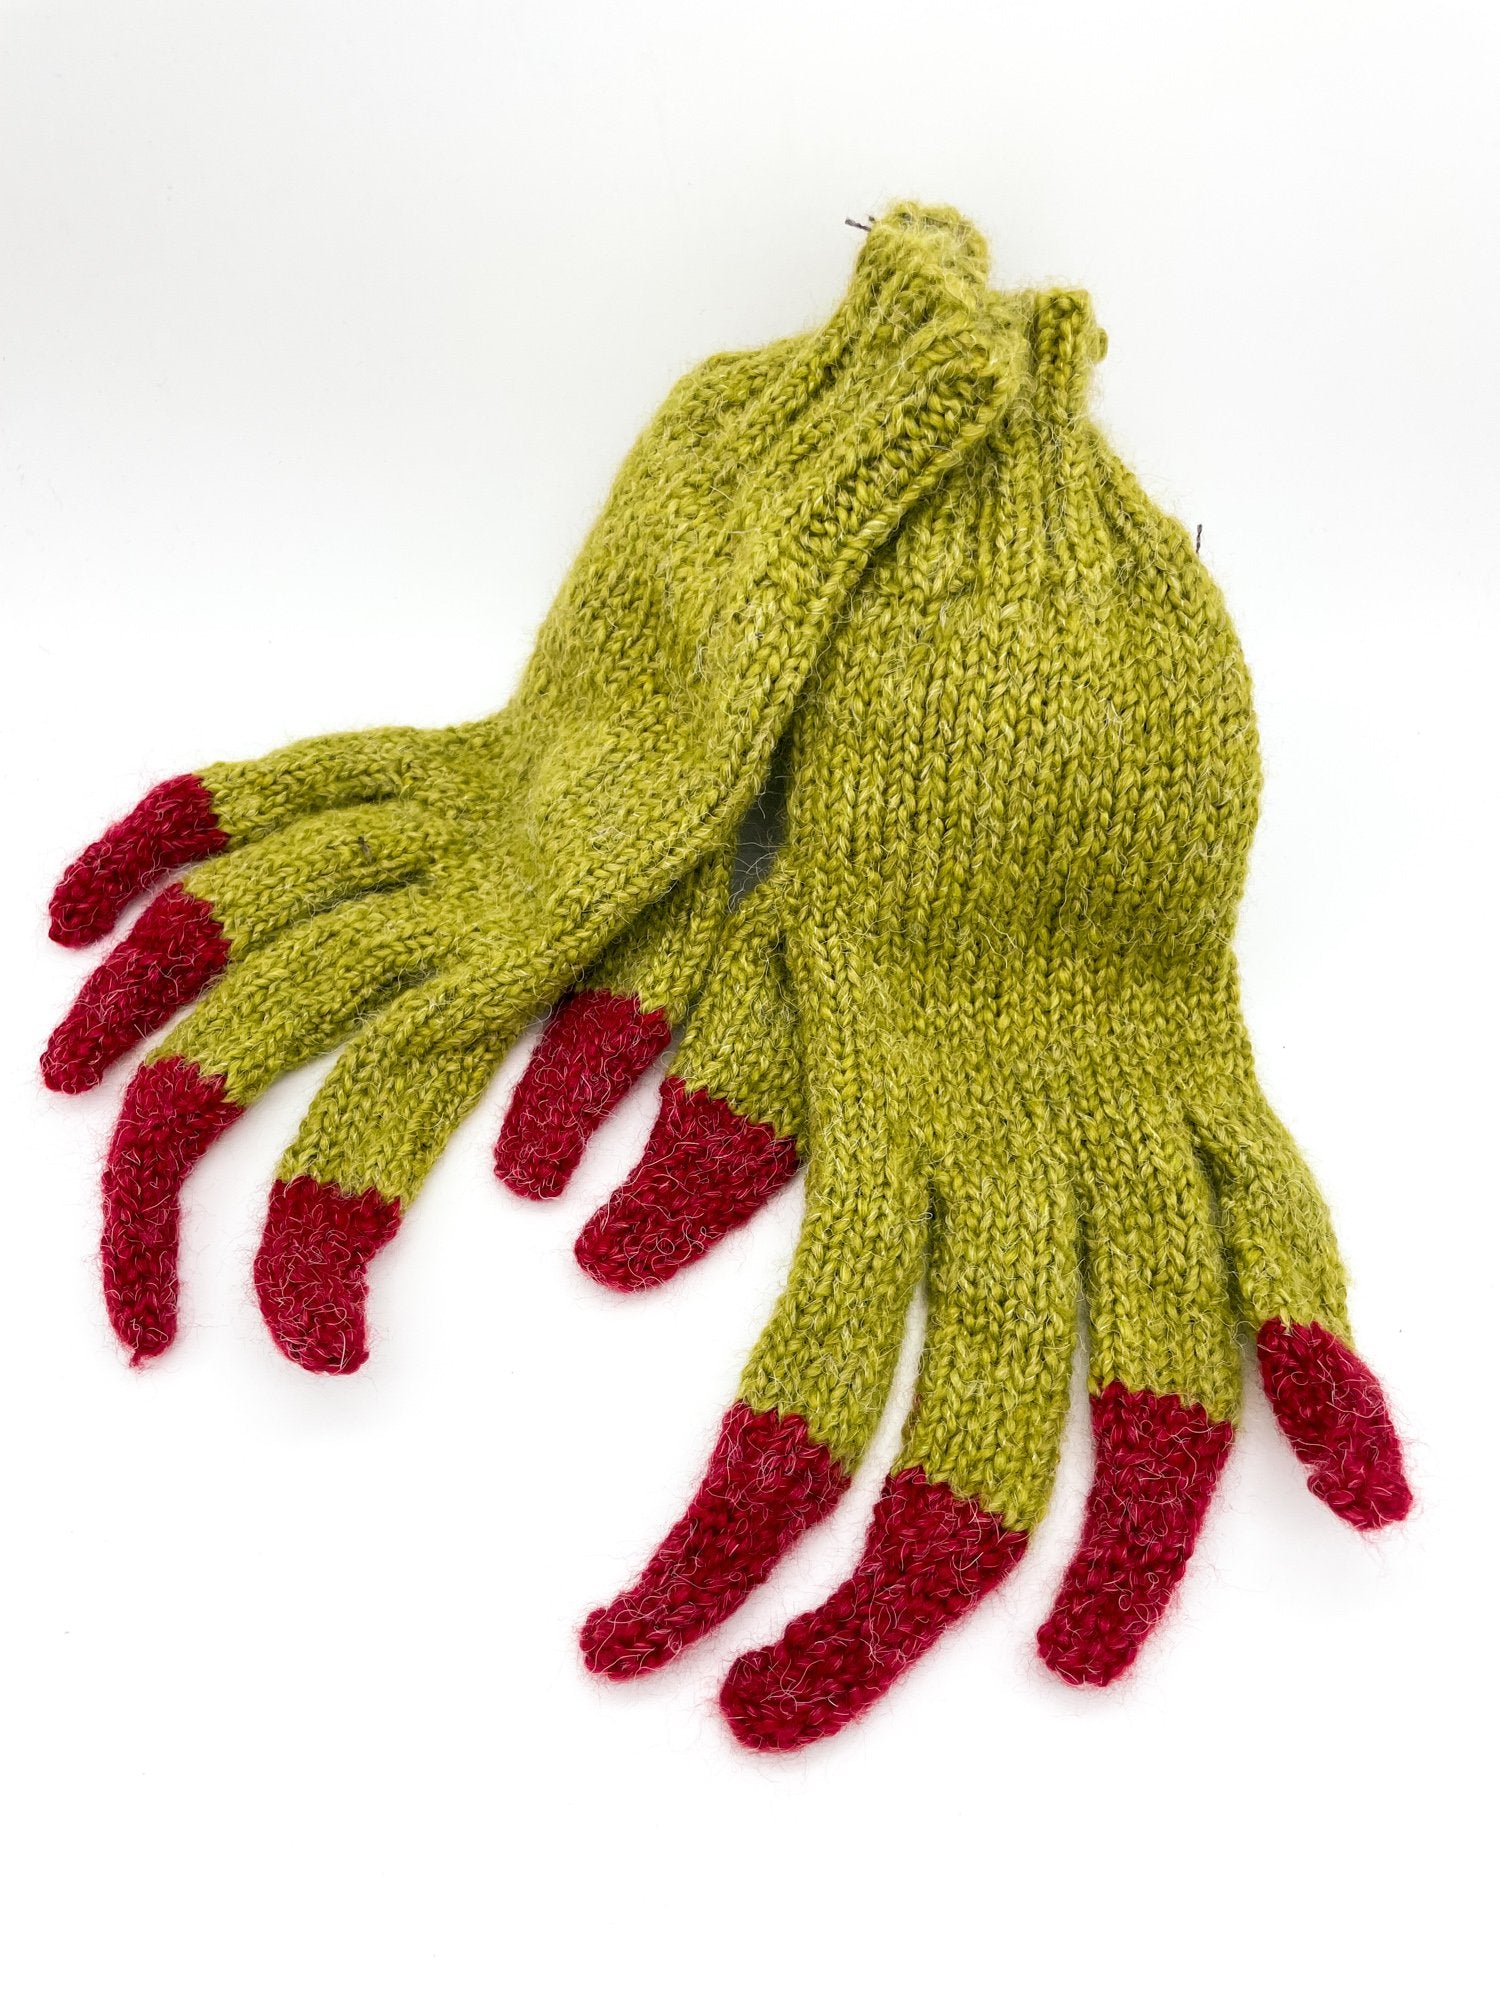 Cozy Witch Gloves - Hand Knit Gloves